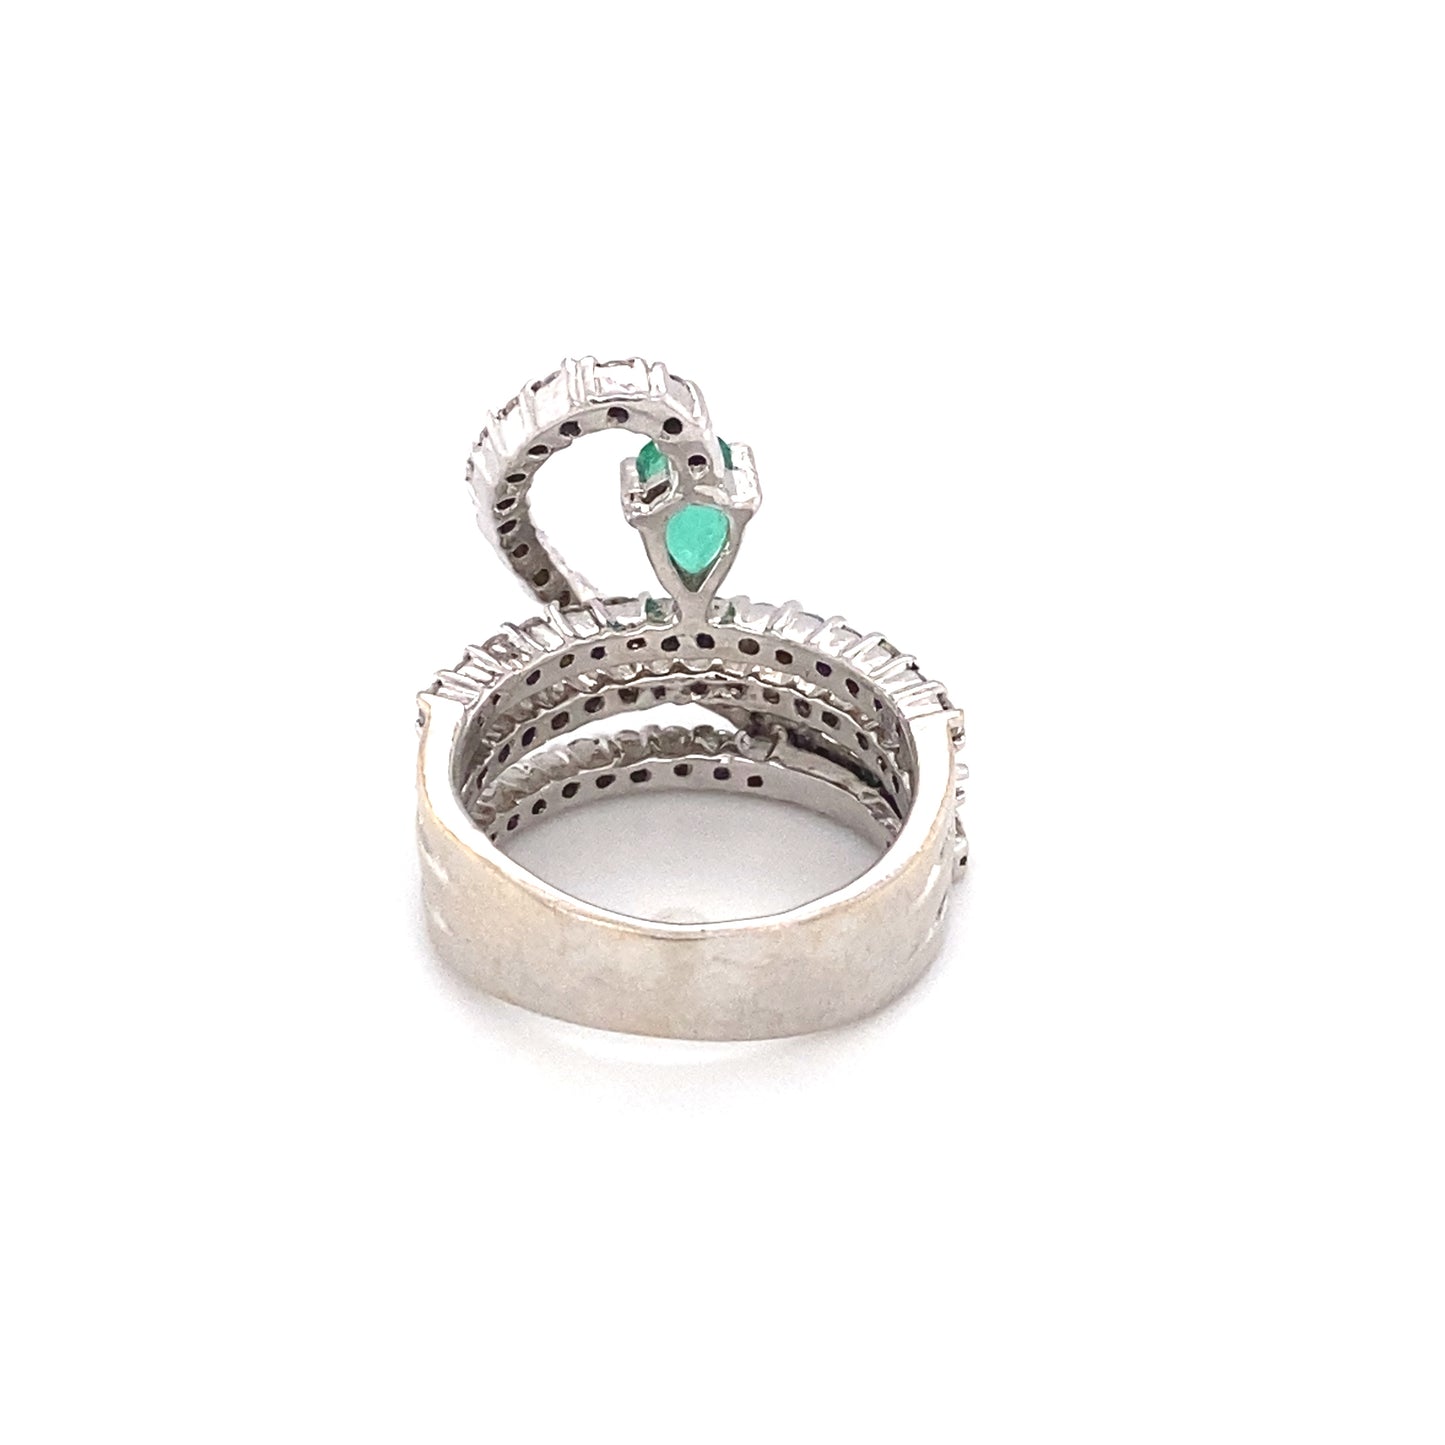 Vintage Emerald and Diamond Serpent Ring in 18K White Gold